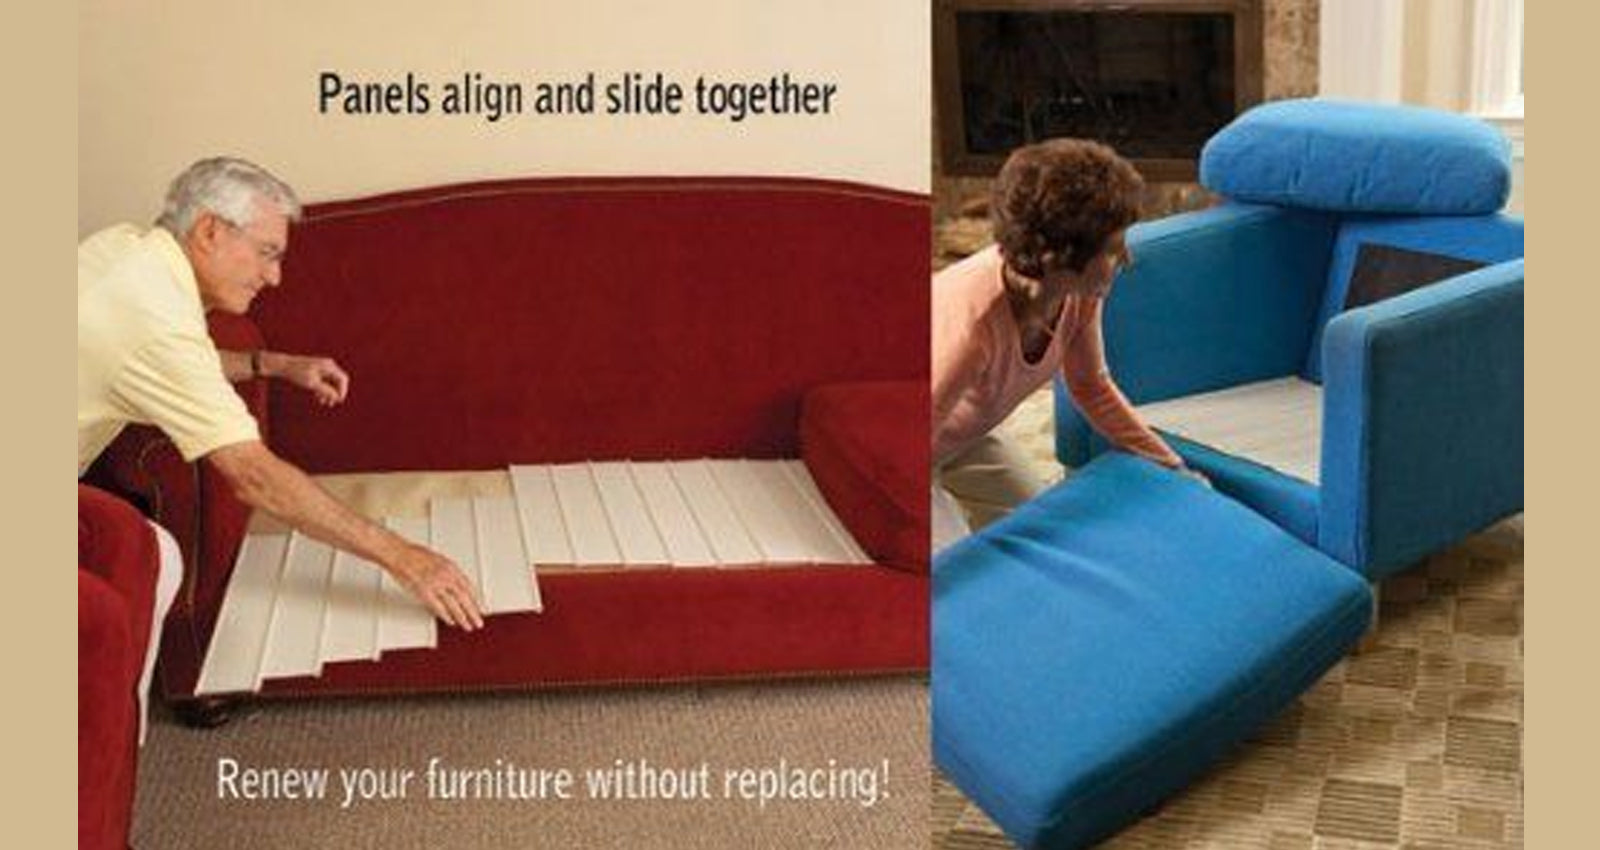 Furniture Fix Sagging Seat and Couch Sofa Cushions Support